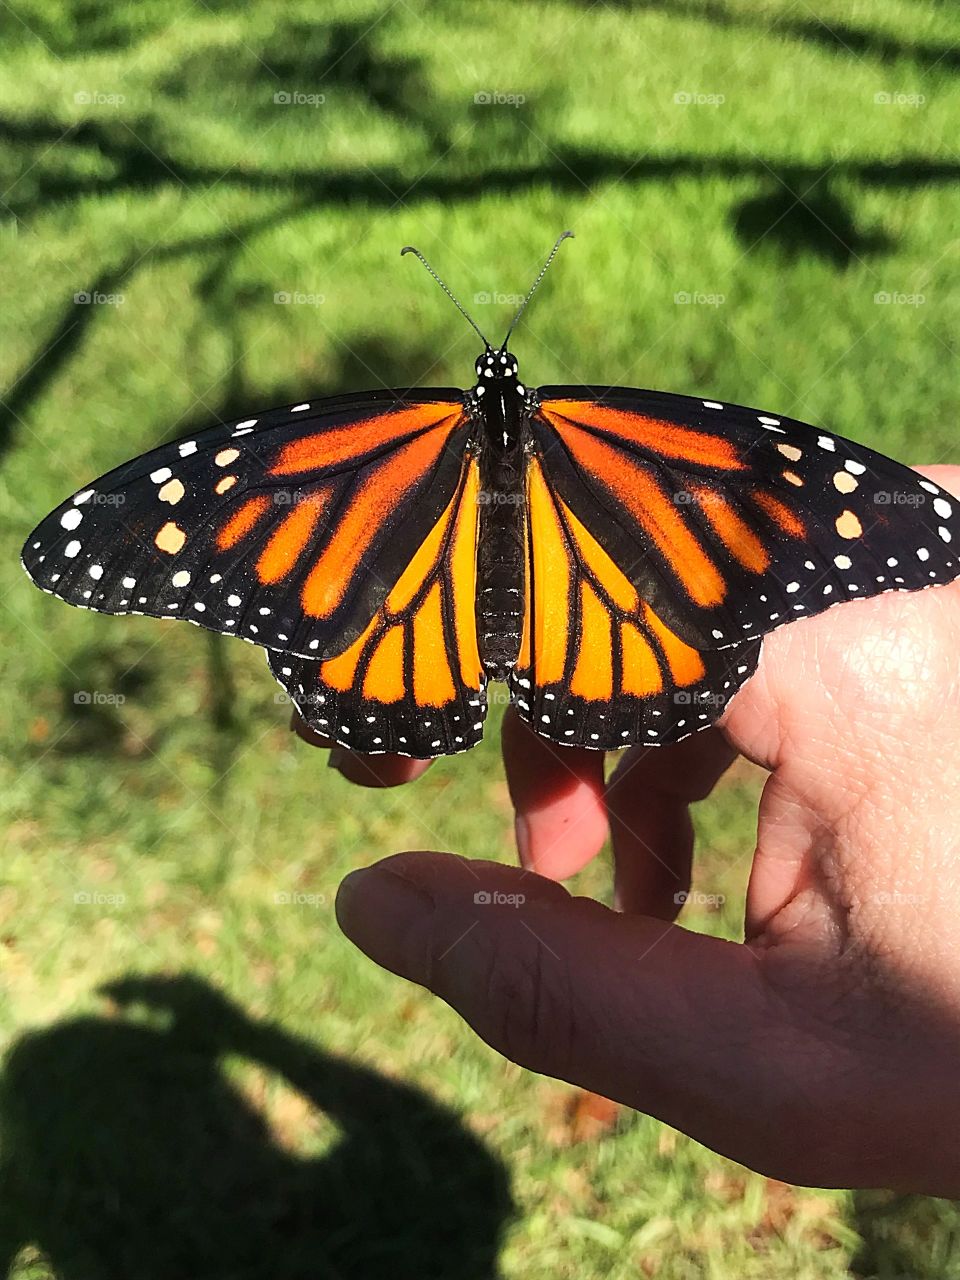 Released her today Monarch 